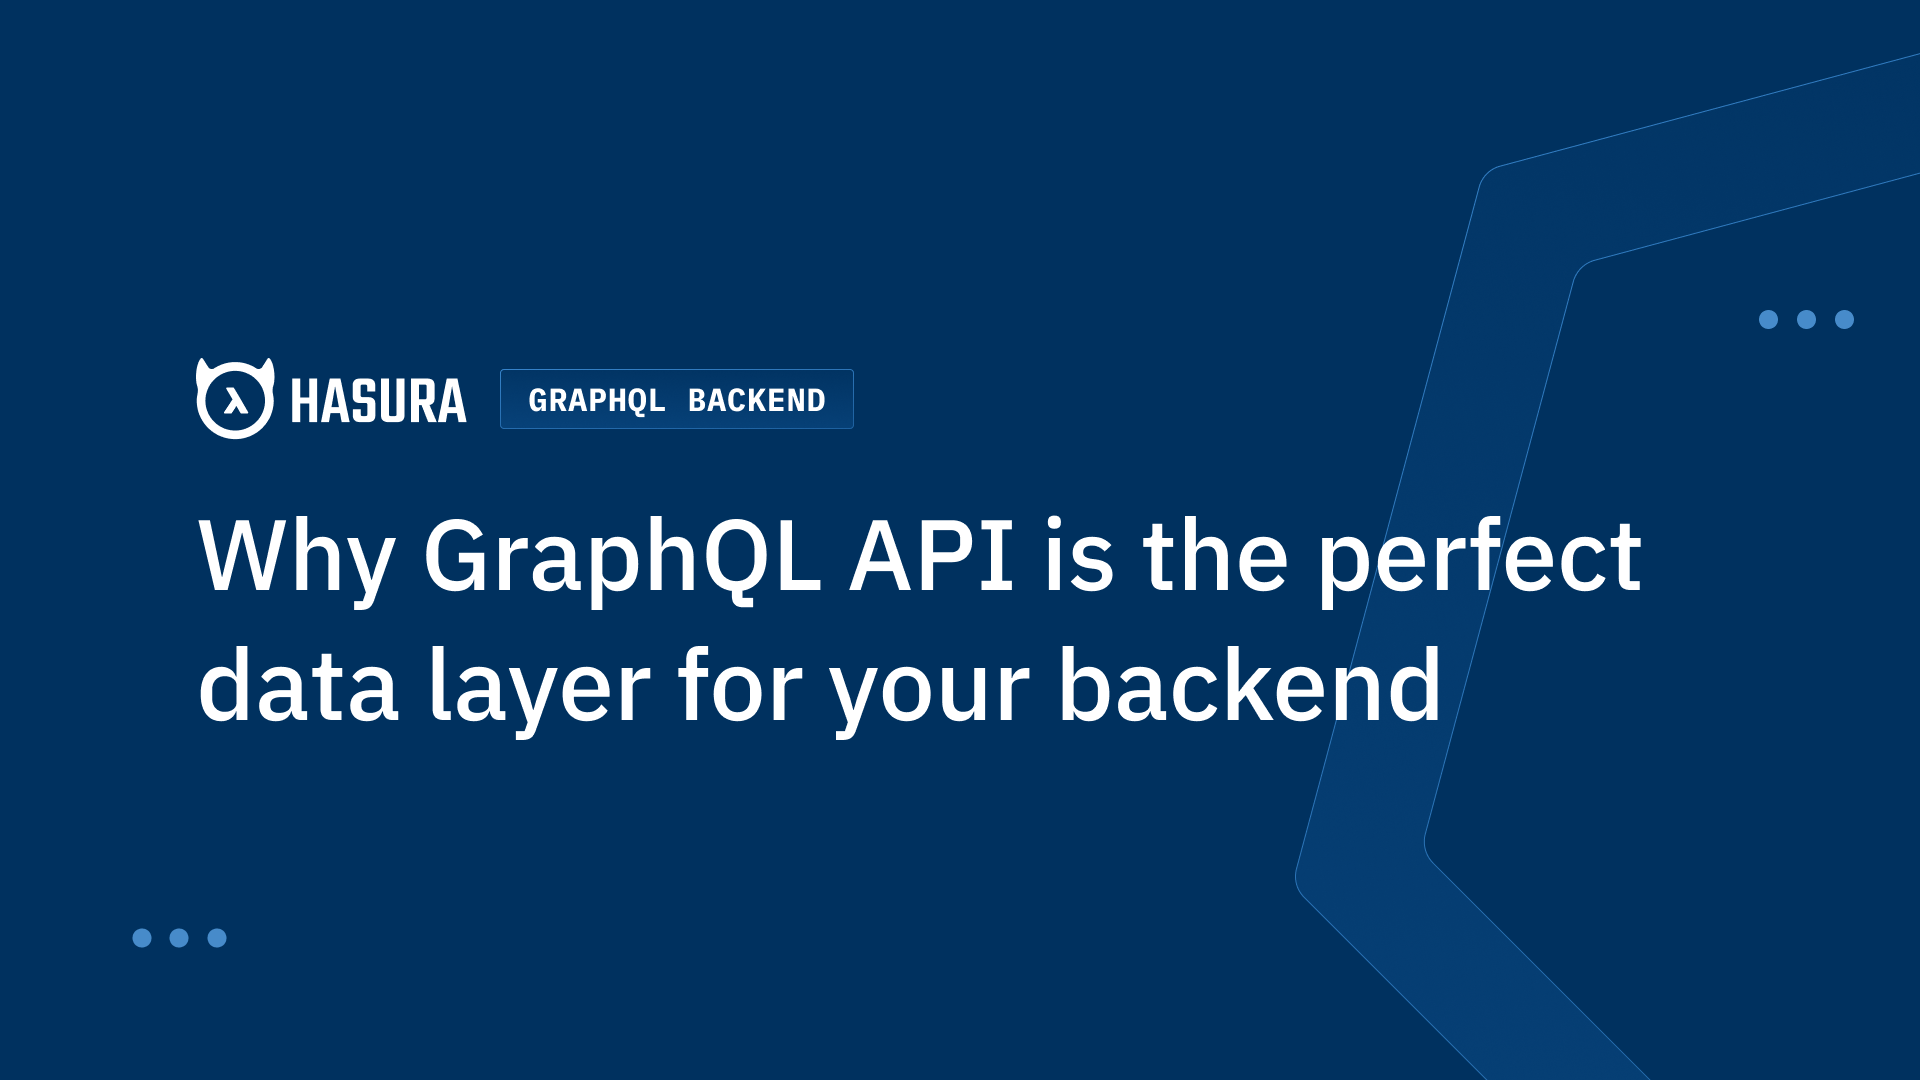 Why GraphQL API is the perfect data layer for your backend